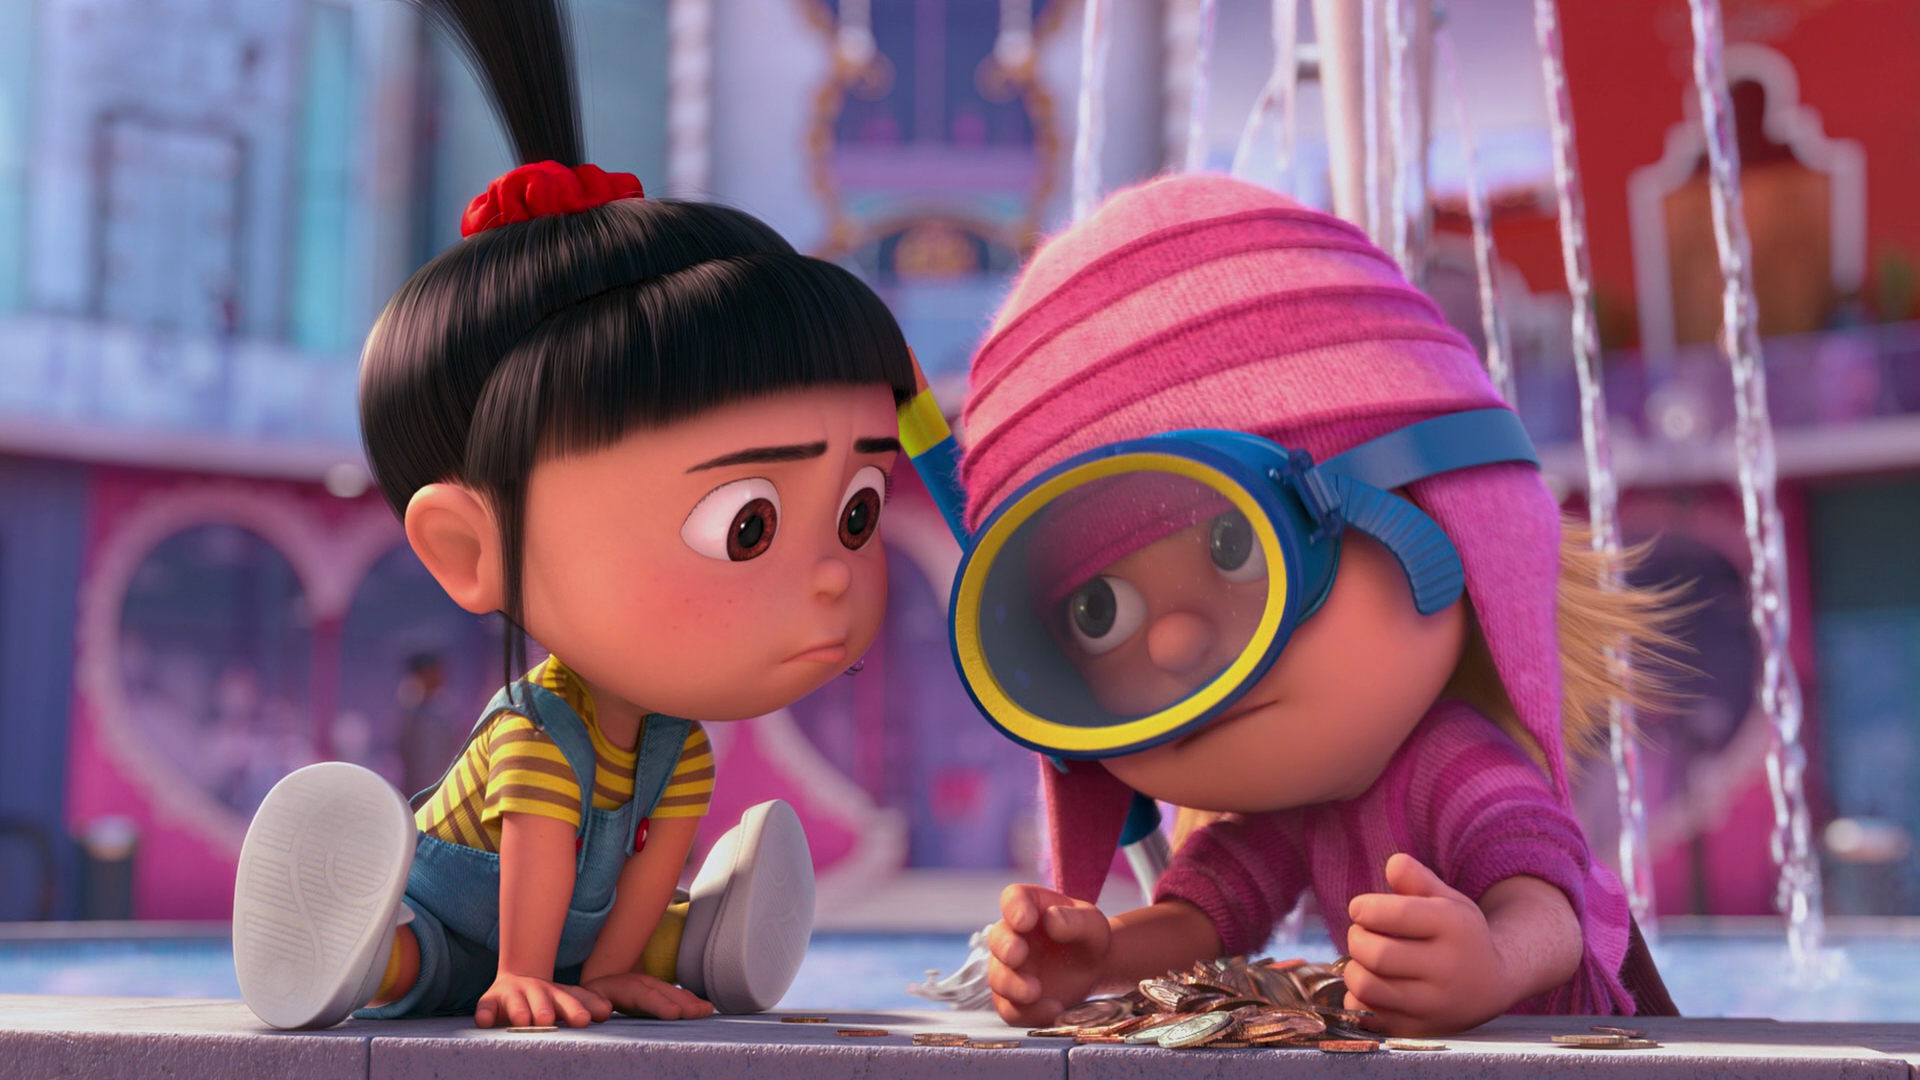 despicable me 2 HD, Photo 1920x1080 Gallery HD Wallpaper